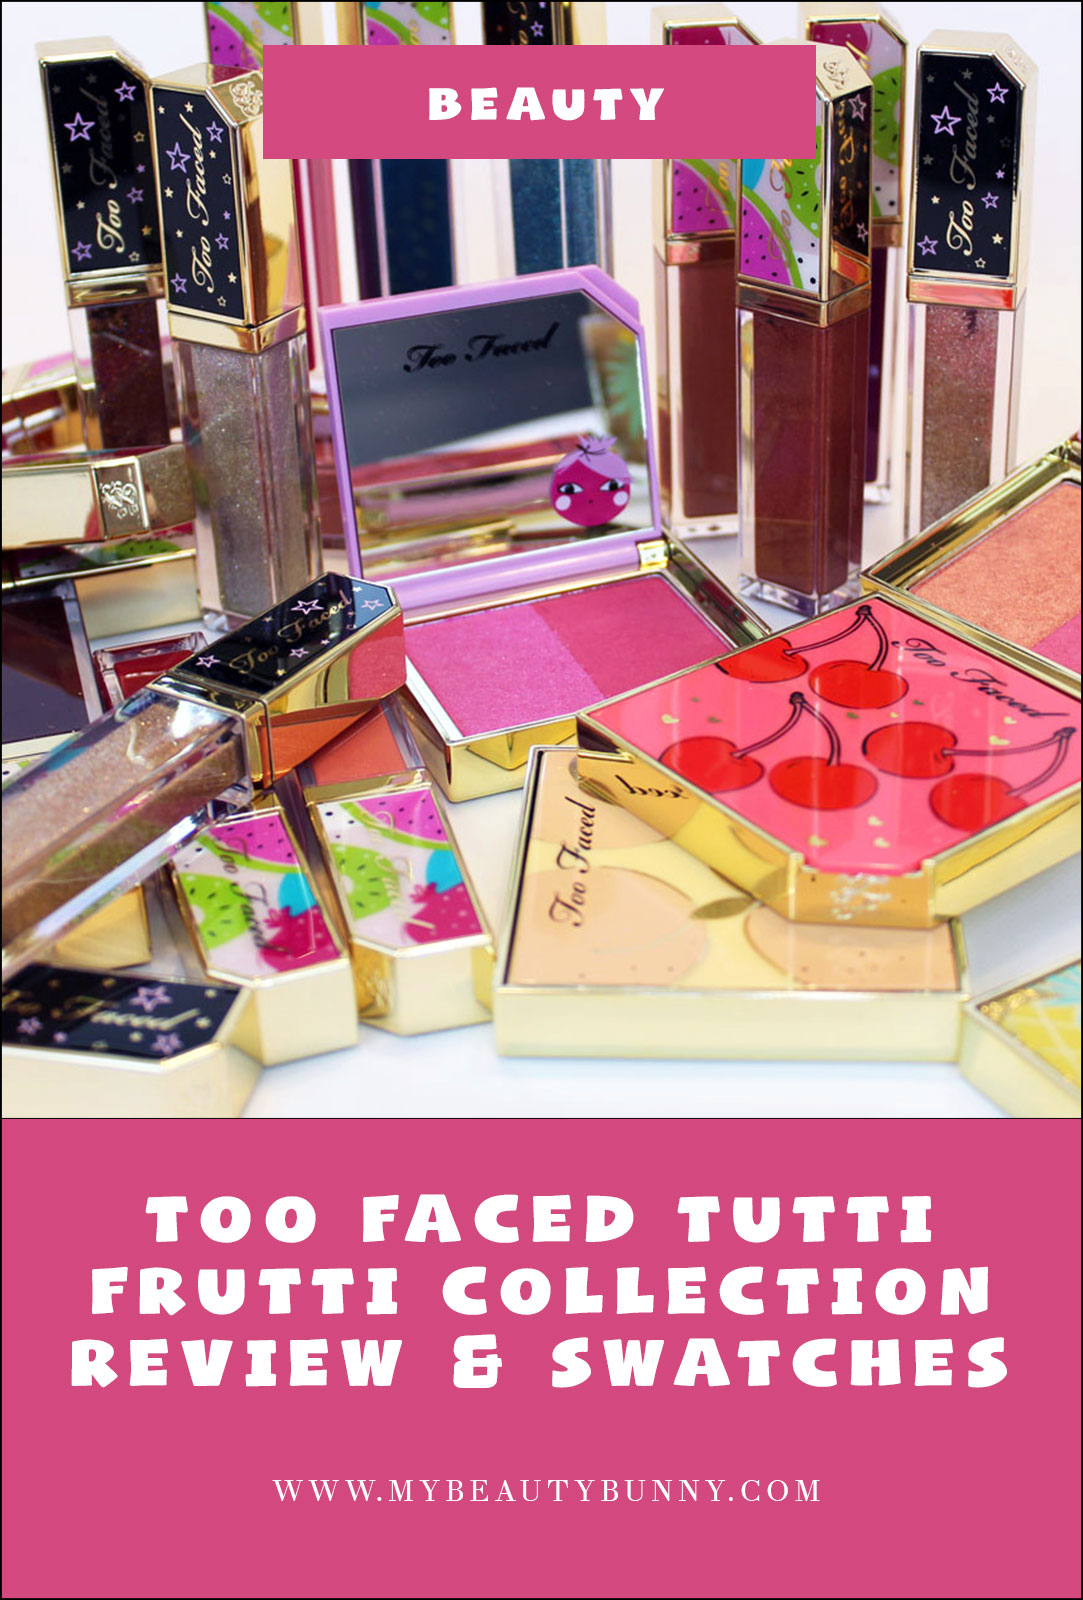 Too Faced Tutti Frutti Collection Review and Swatches by cruelty free blog My Beauty Bunny